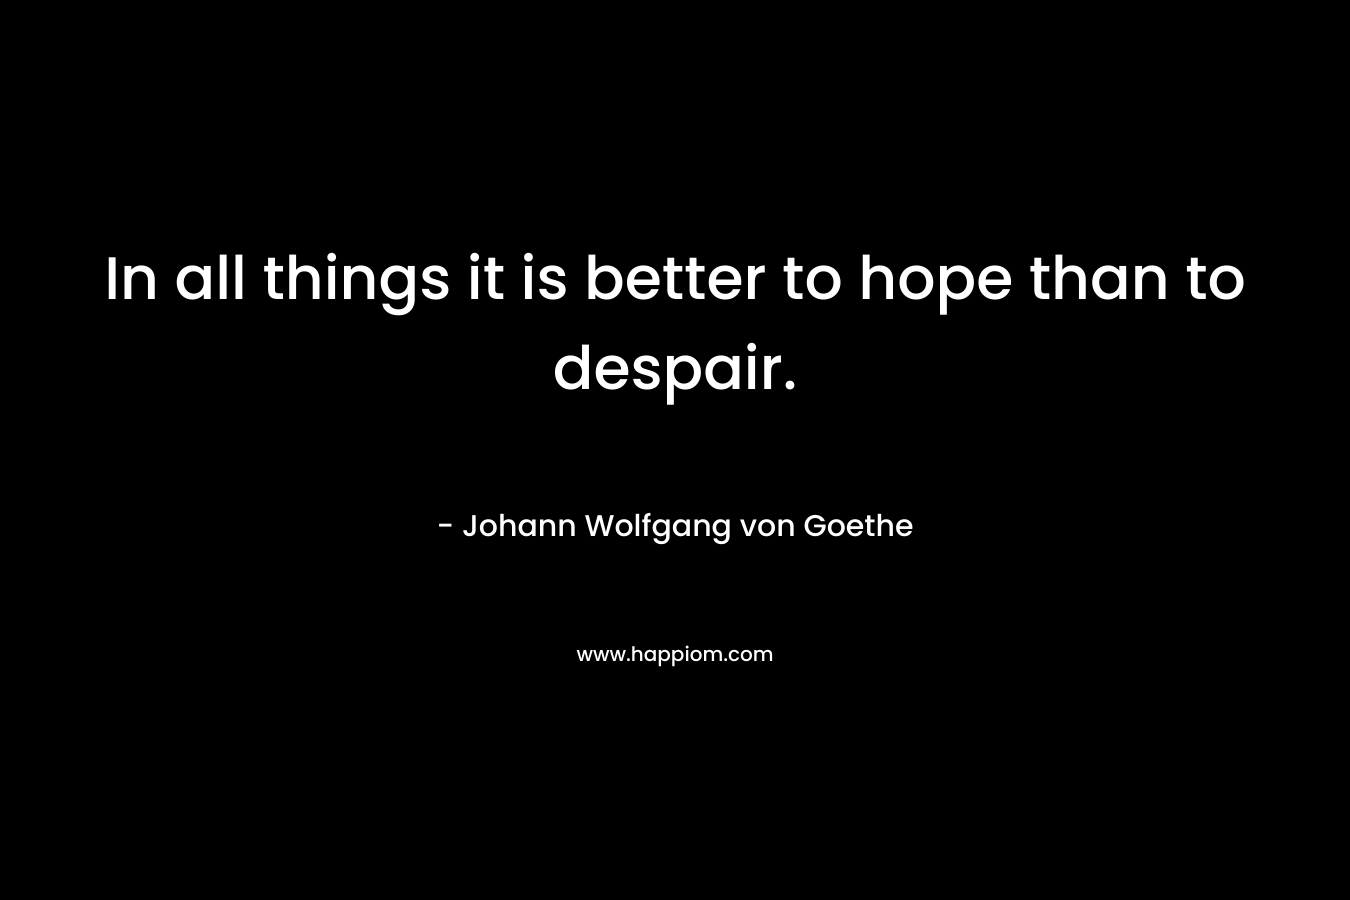 In all things it is better to hope than to despair.